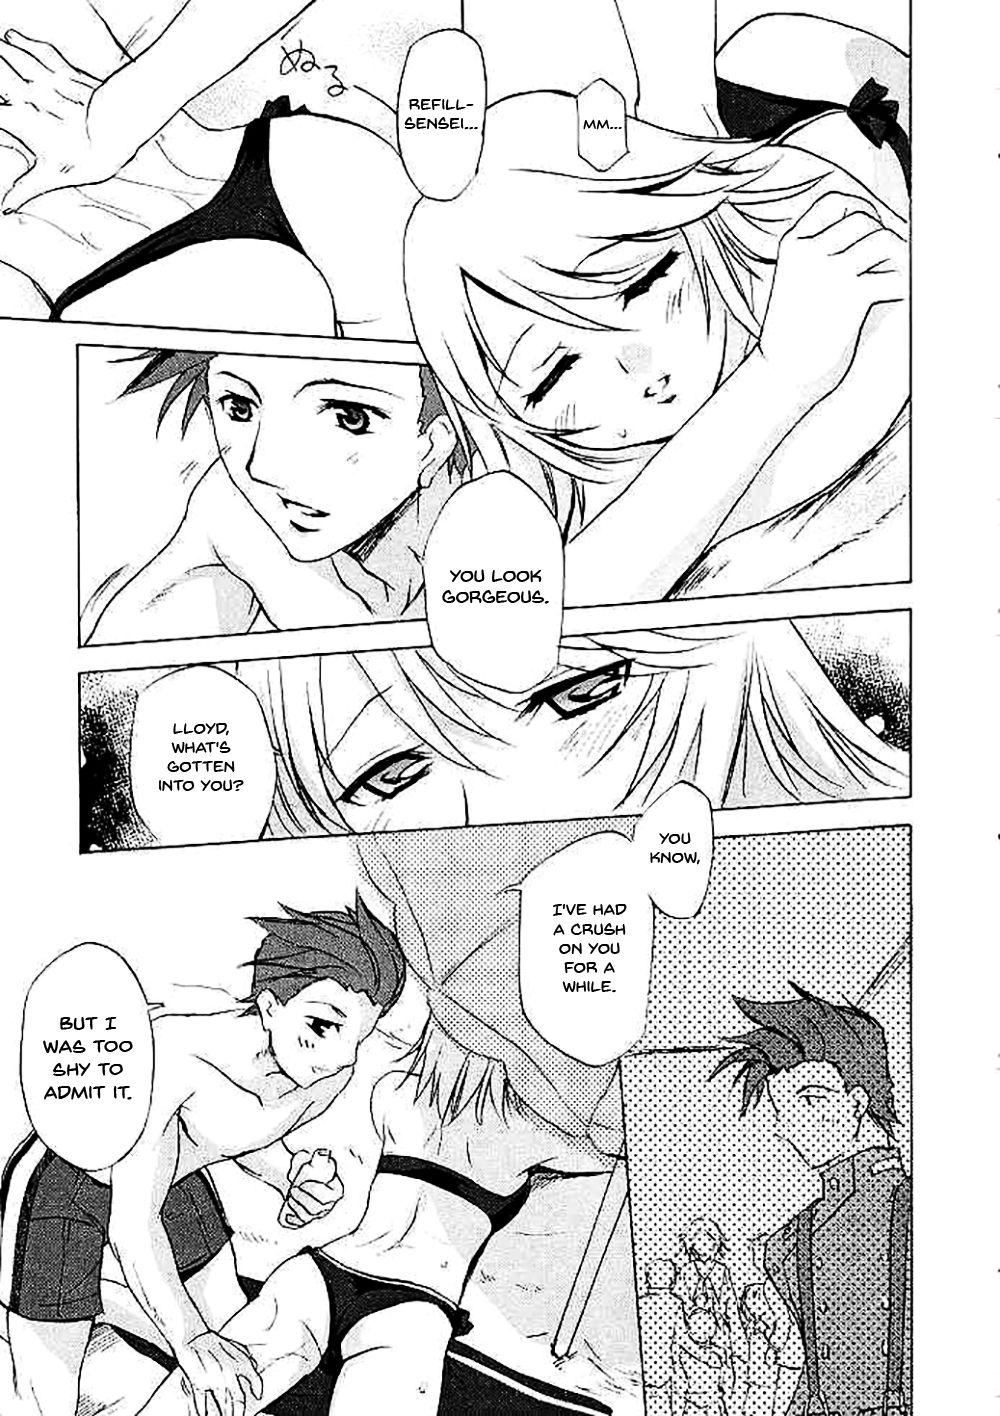 Rola Tales of Seaside - Tales of symphonia Gay Kissing - Page 4